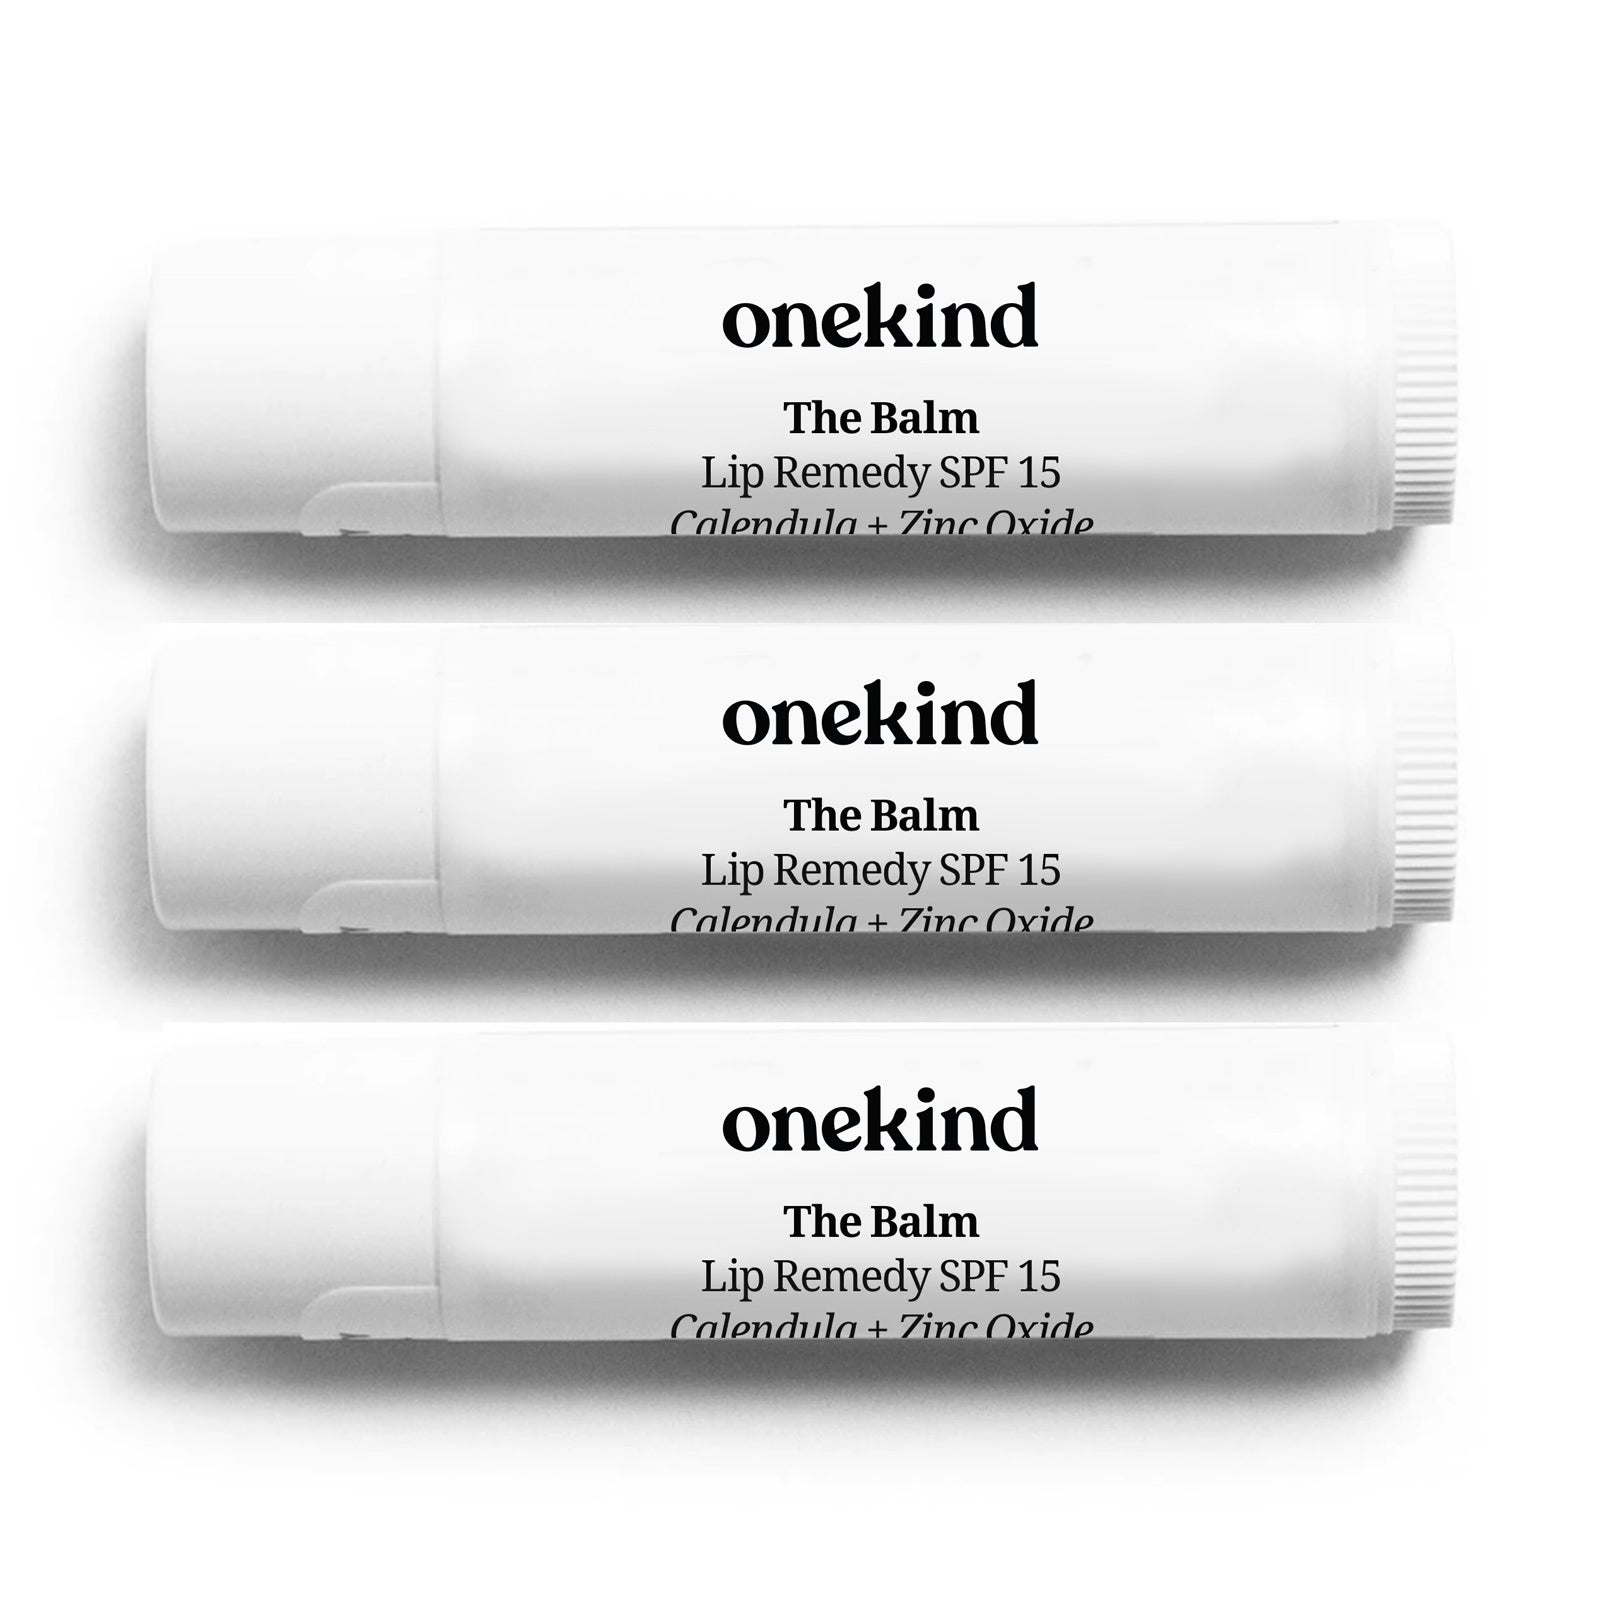 3 sticks of The Balm Lip Remedy SPF 15 lined up against a white background.